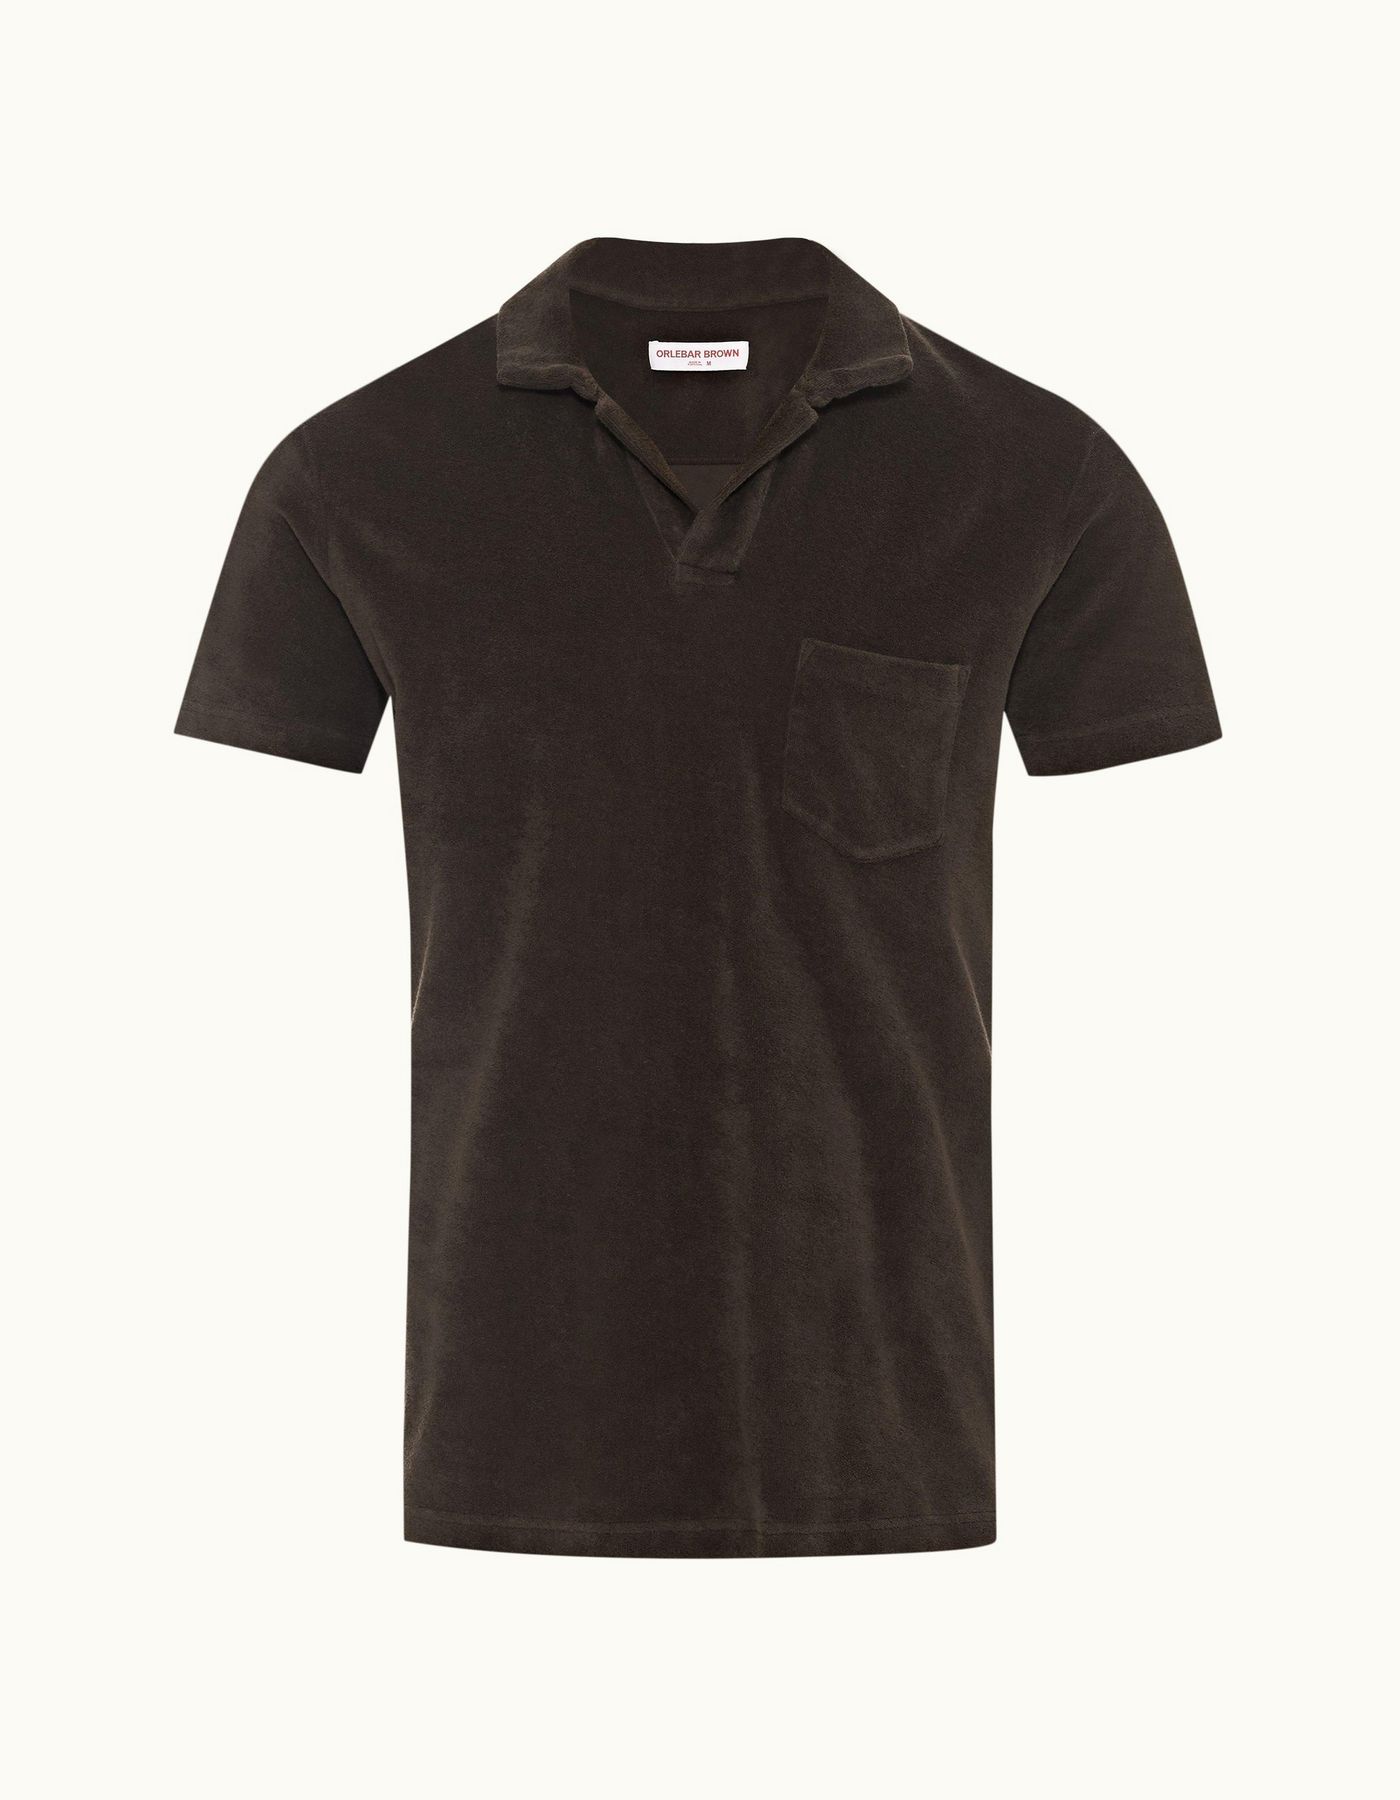 Terry Towelling - Mens Truffle Tailored Fit Resort Towelling Polo Shirt